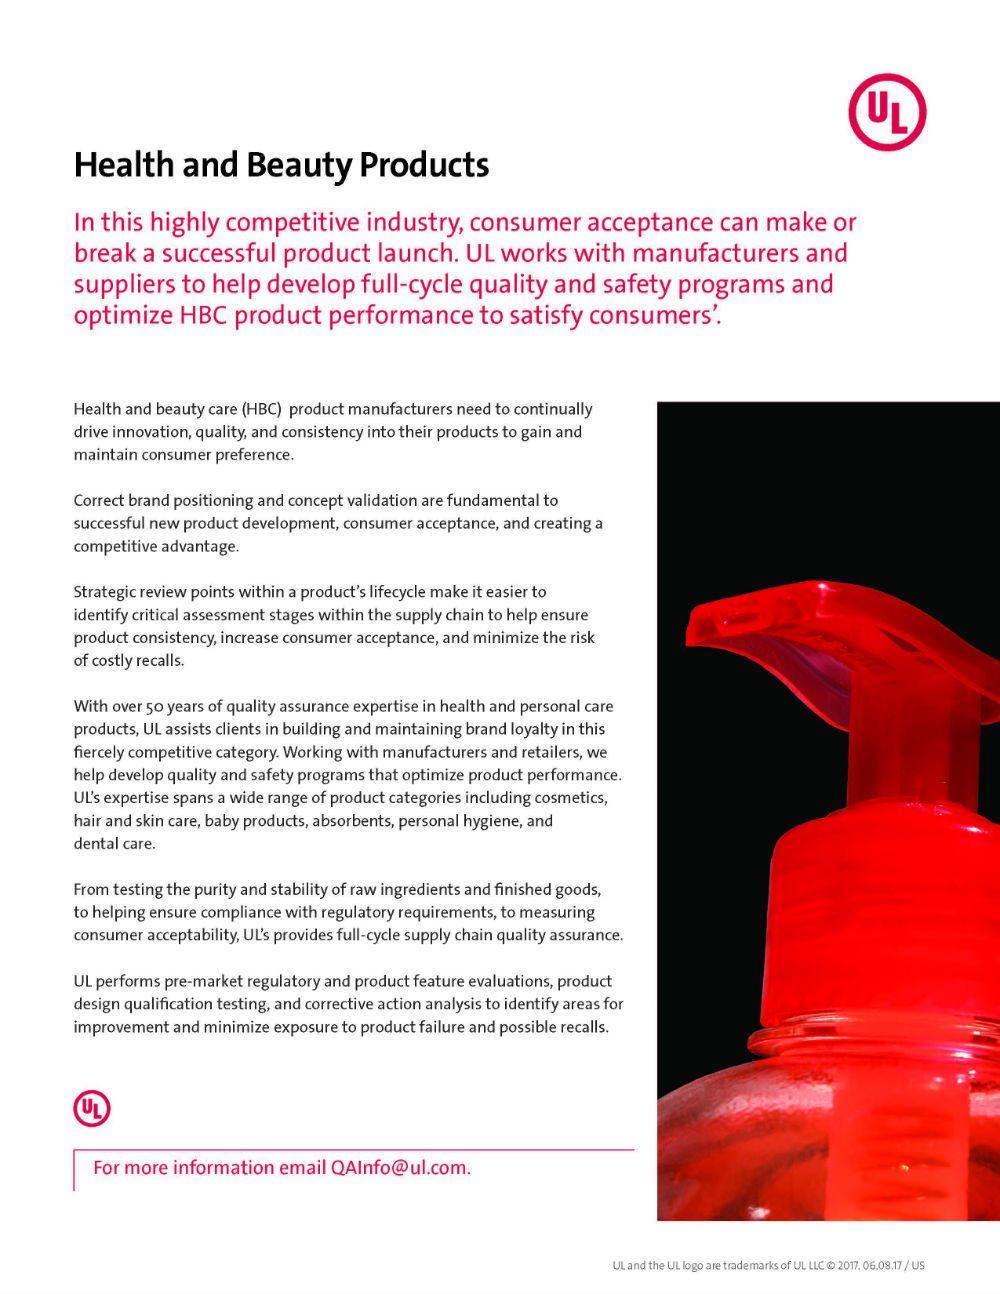 Us Personal Care Manufacturer's Logo - Health and Beauty Product Quality Assurance Services | UL